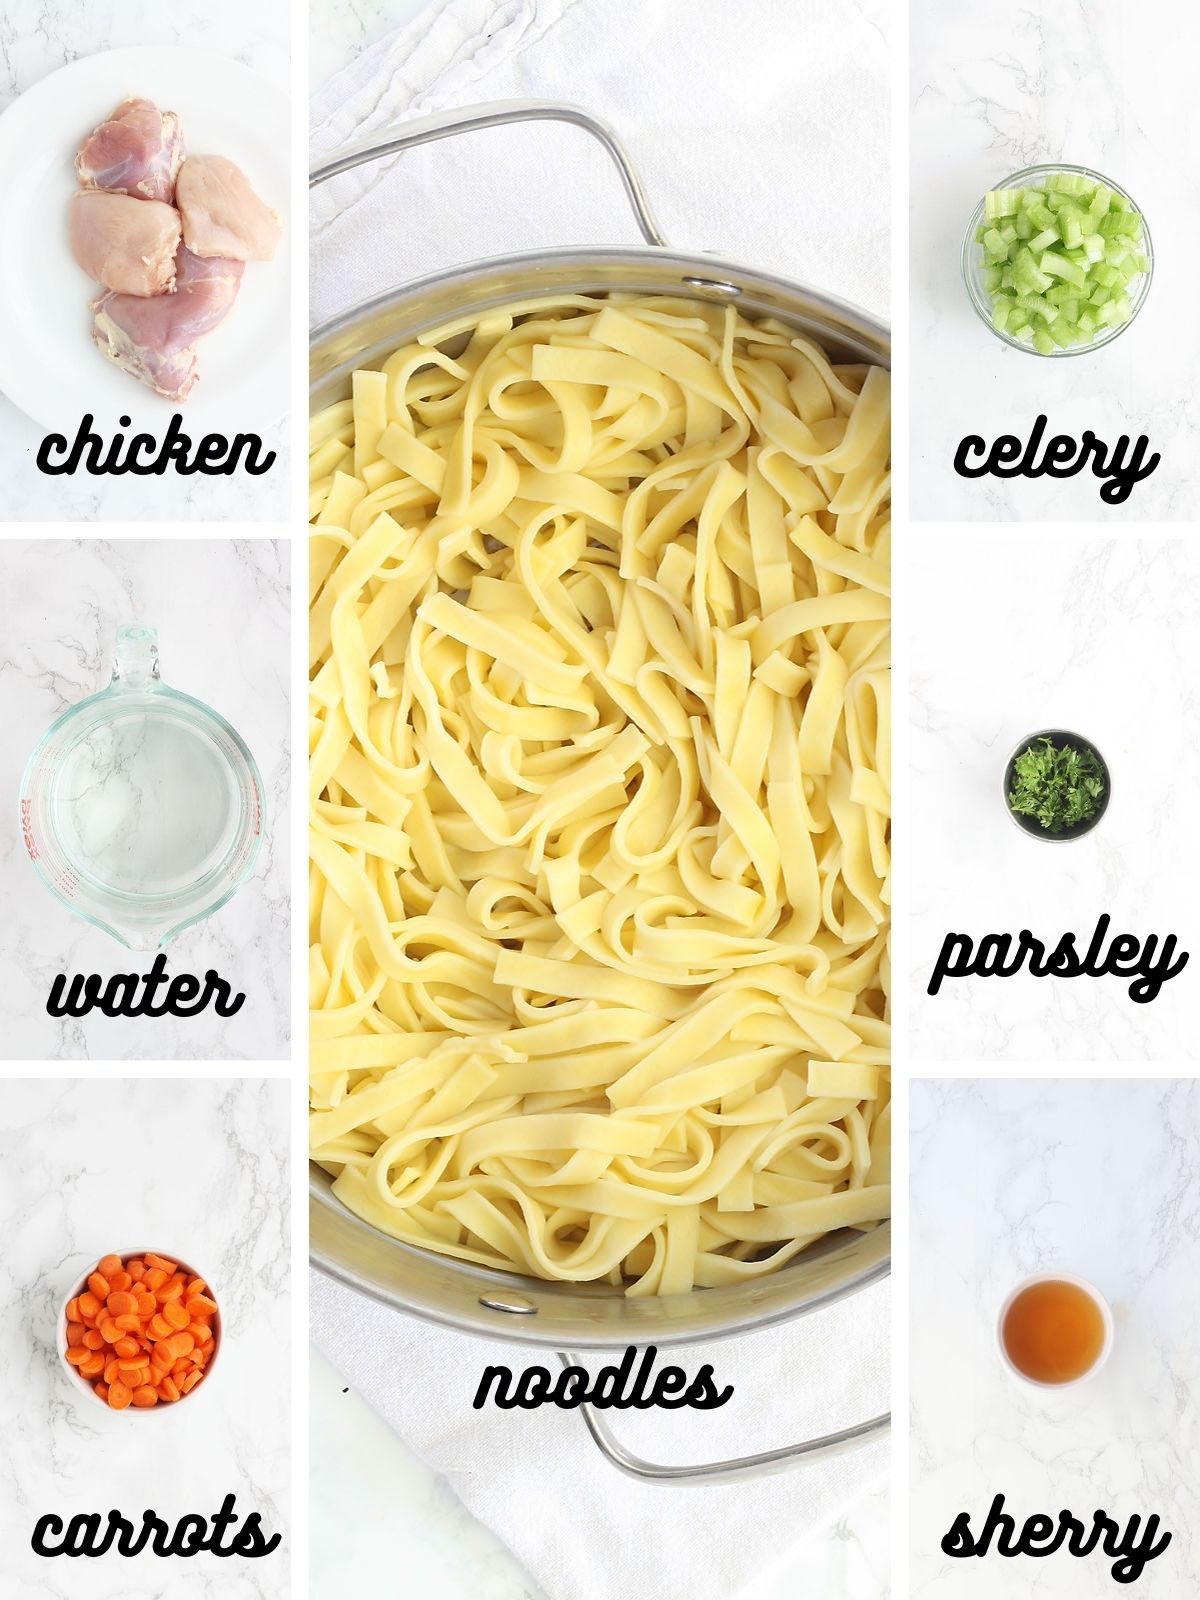 chicken noodle soup ingredients include raw chicken, water, carrots, celery, parsley, sherry and egg noodles